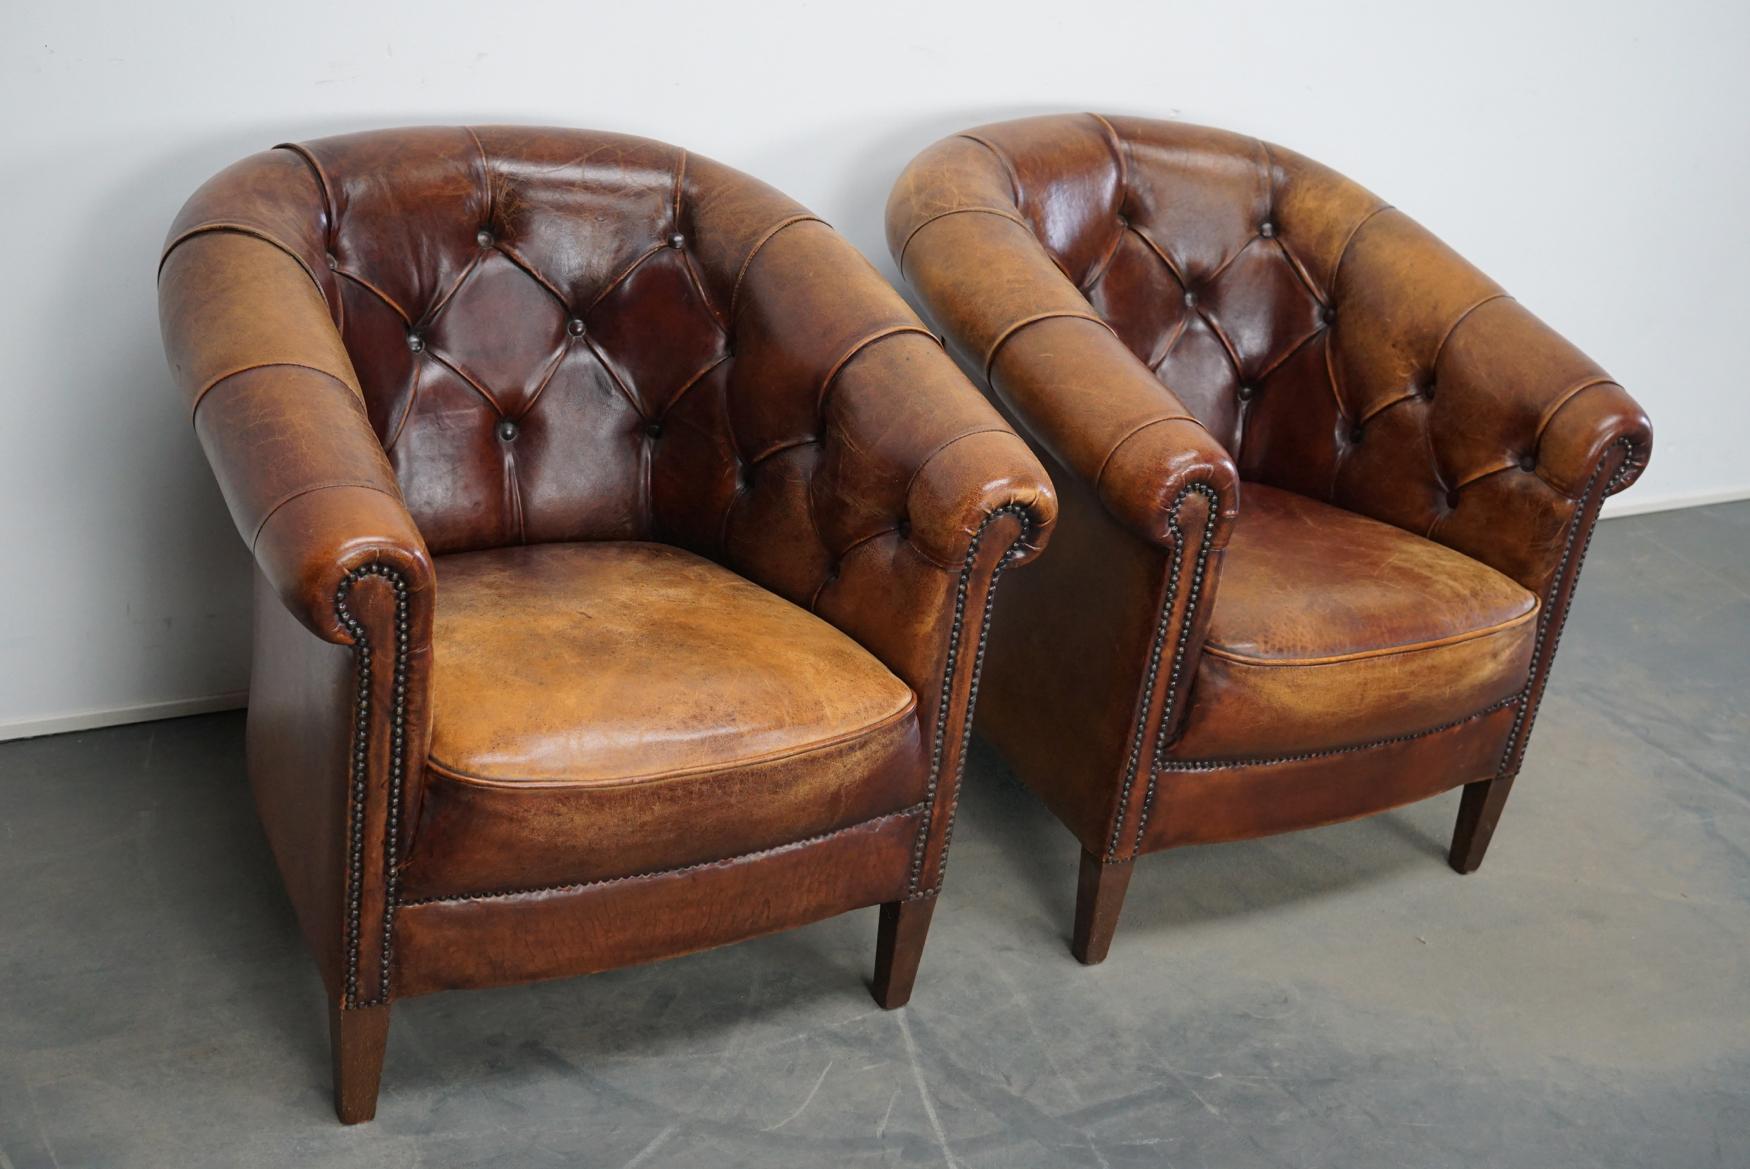 Industrial Vintage Dutch Chesterfield Cognac Leather Club Chairs, Set of 2